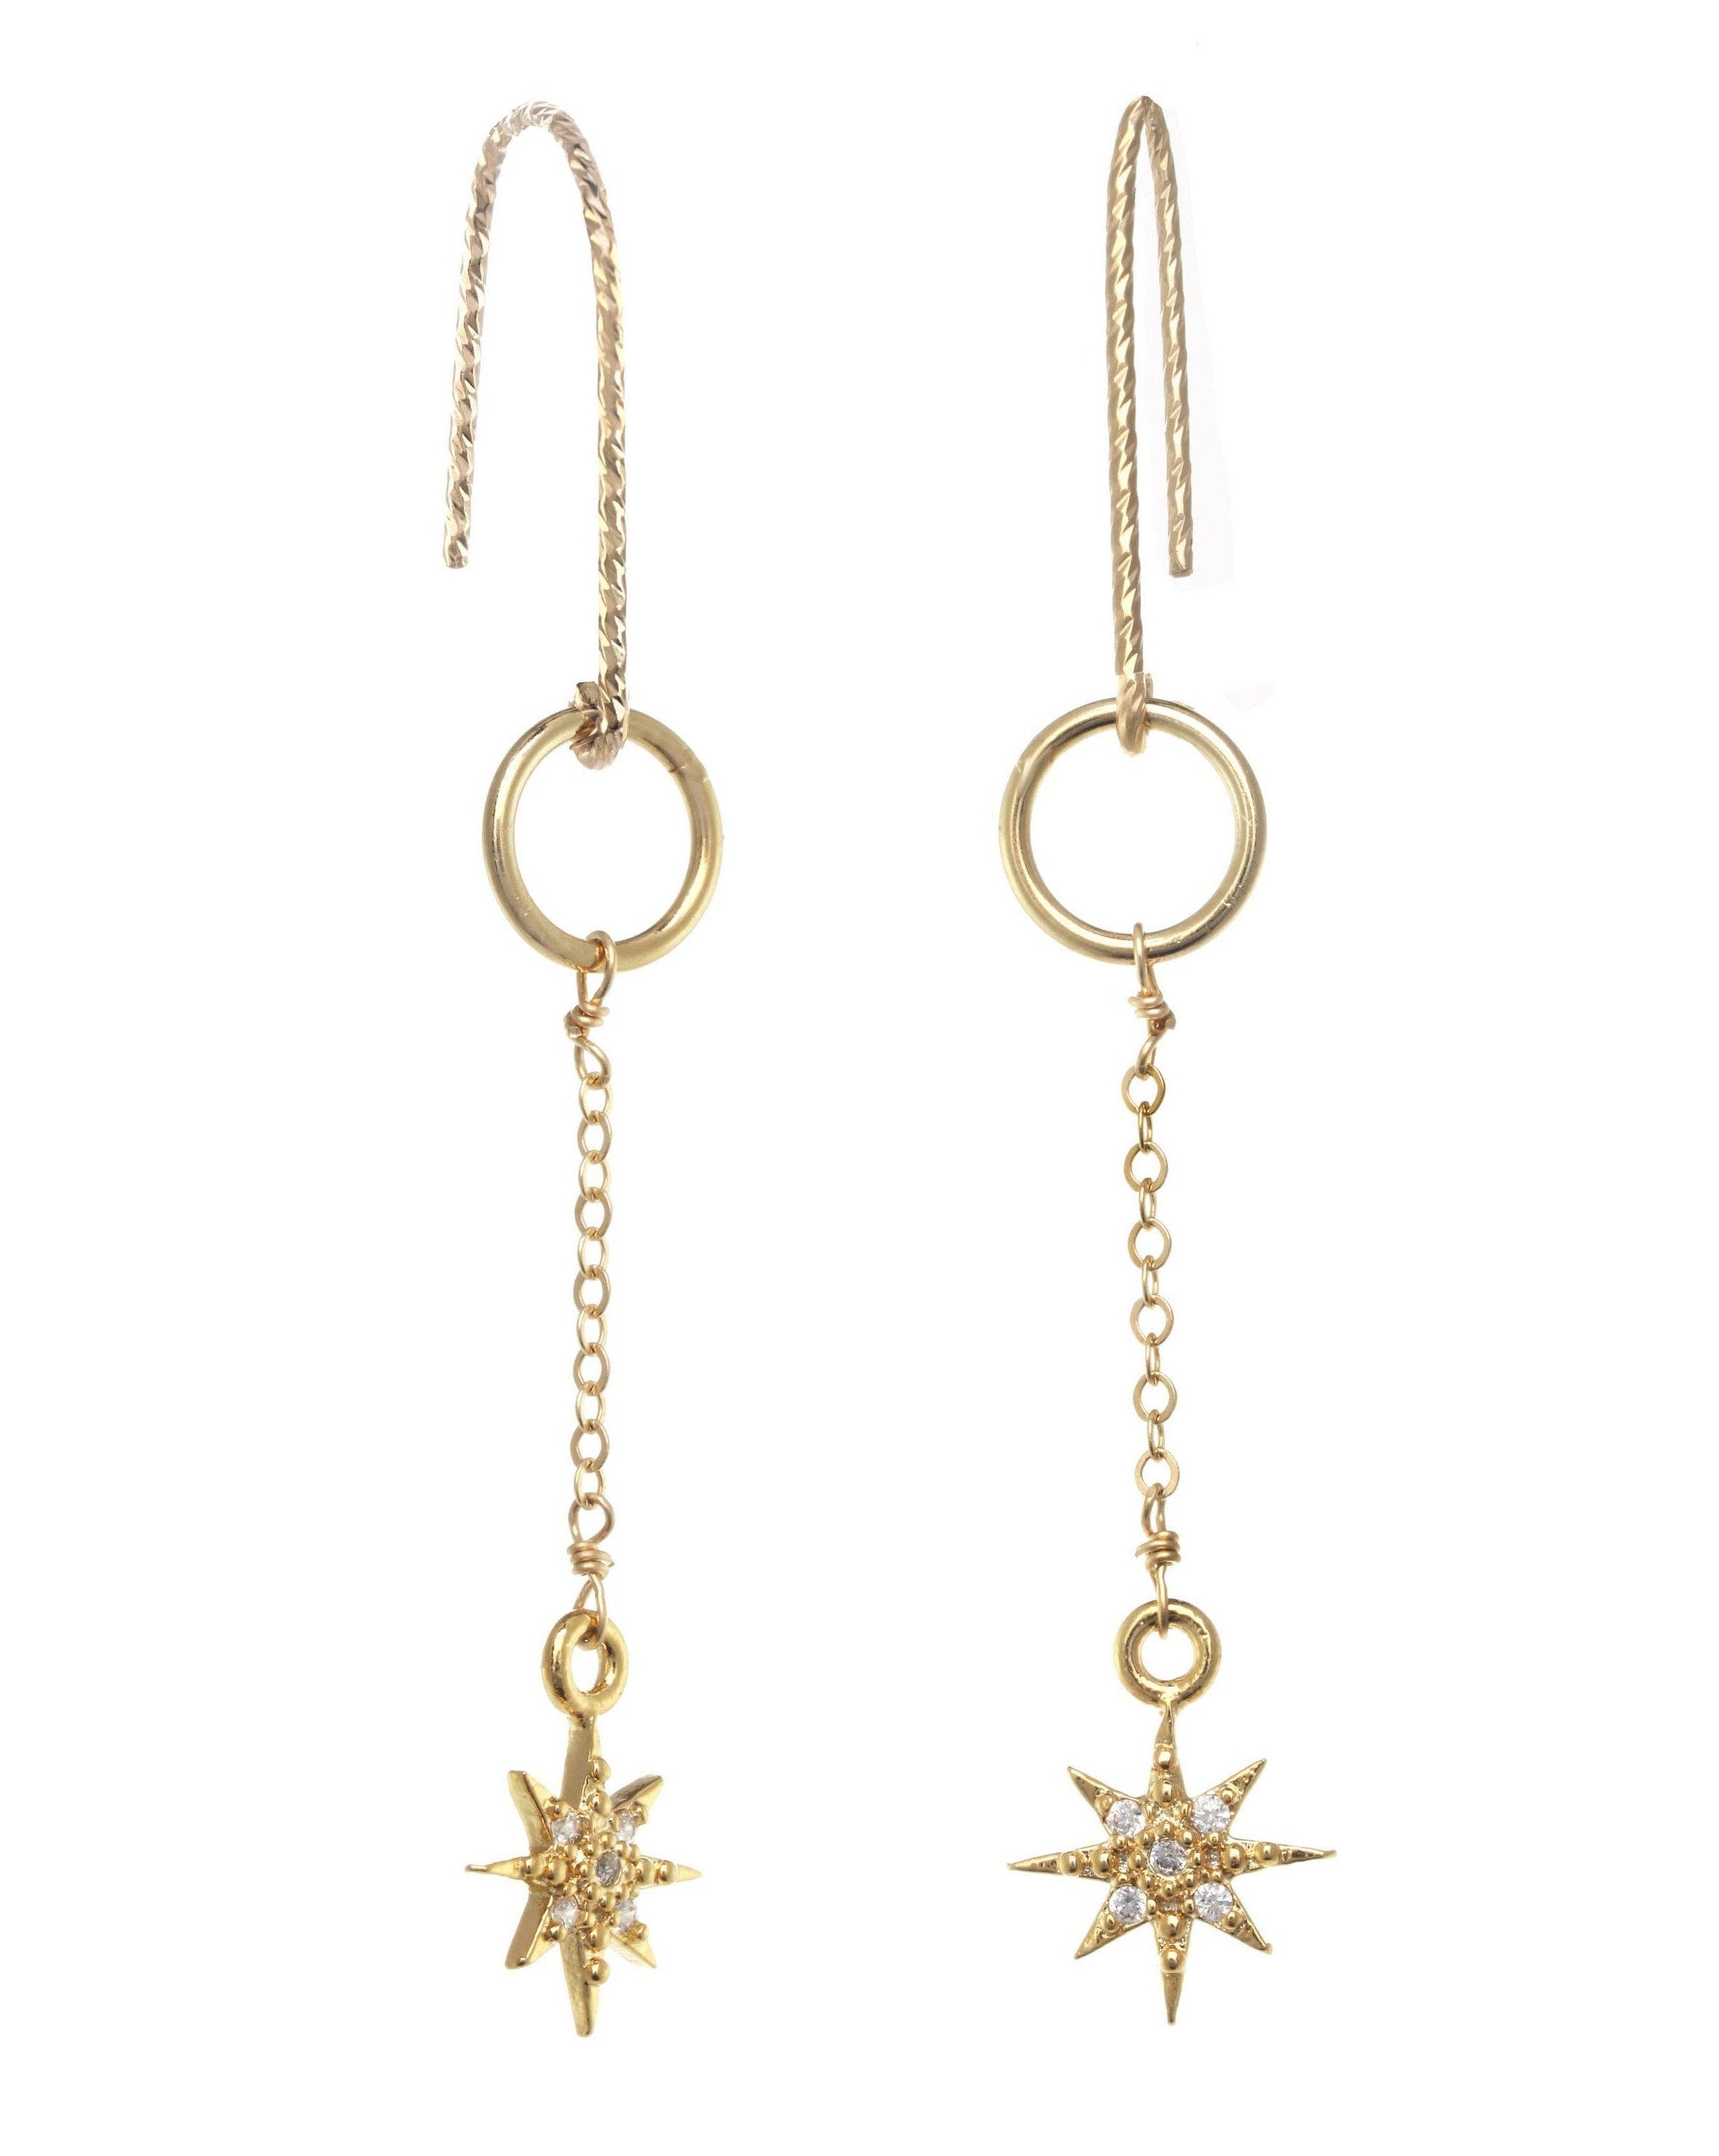 You Stardrop Earrings by KOZAKH. Diamond textured hook dangling earrings, crafted in 14K Gold Filled, featuring a Cubic Zirconia encrusted 8 point star charm.